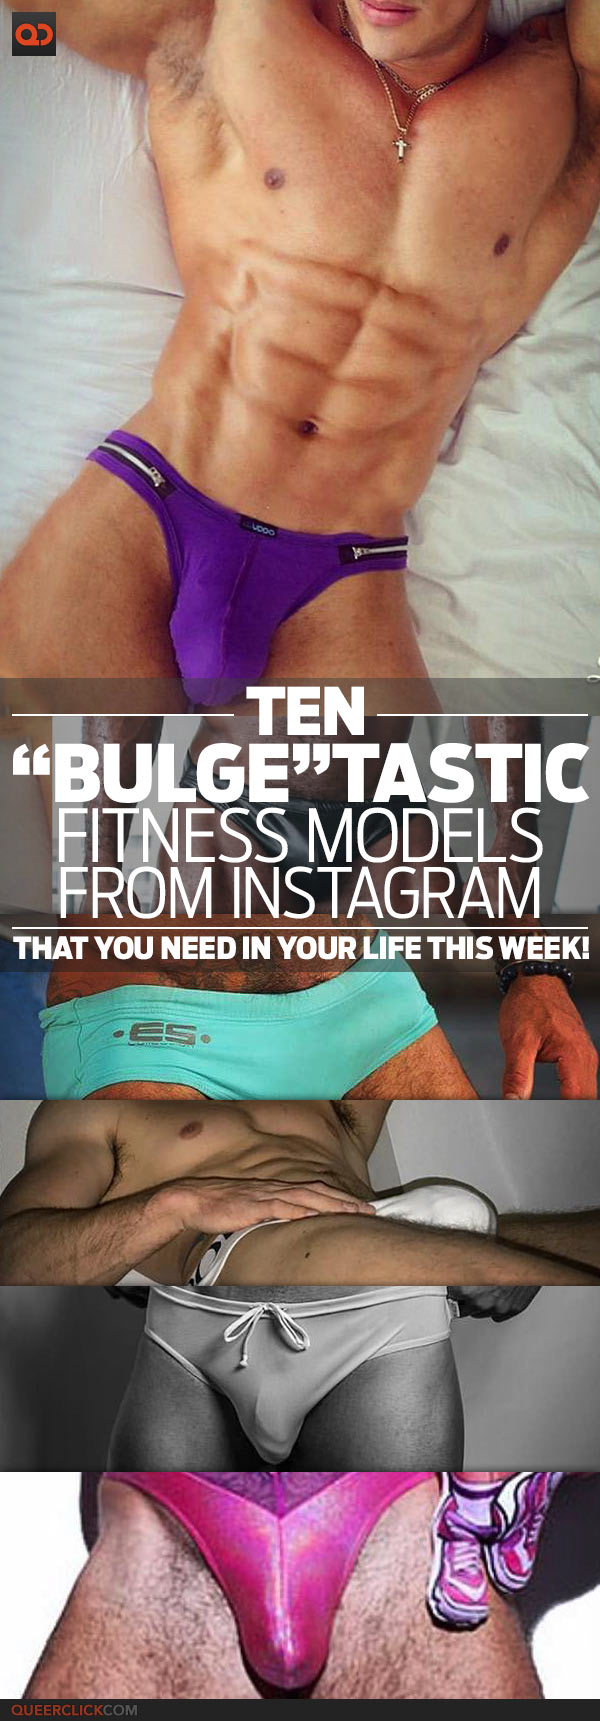 Nine “Bulge”tastic Fitness Models From Instagram That You Need In Your Life This Week!